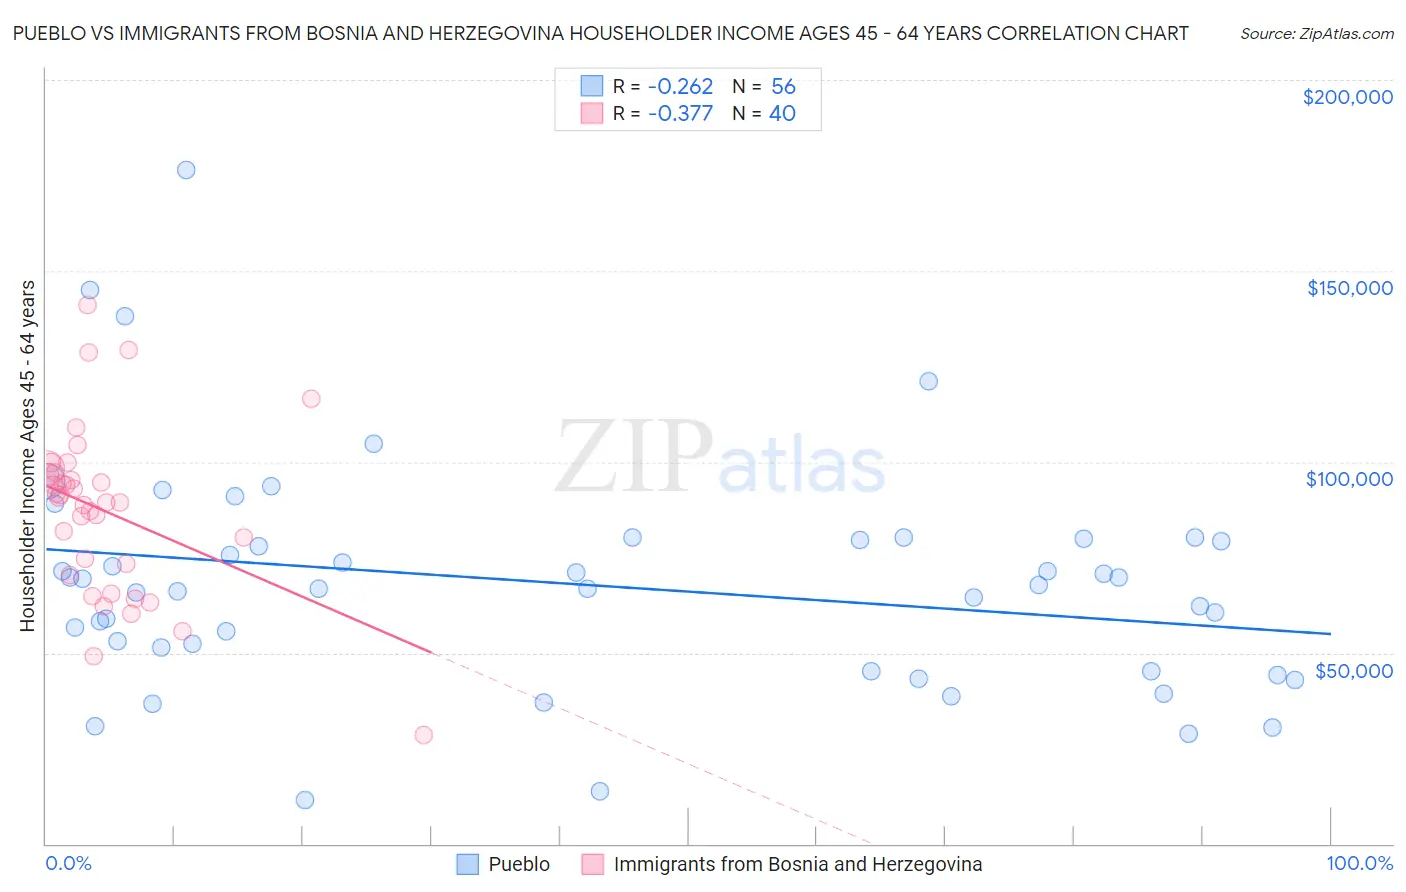 Pueblo vs Immigrants from Bosnia and Herzegovina Householder Income Ages 45 - 64 years